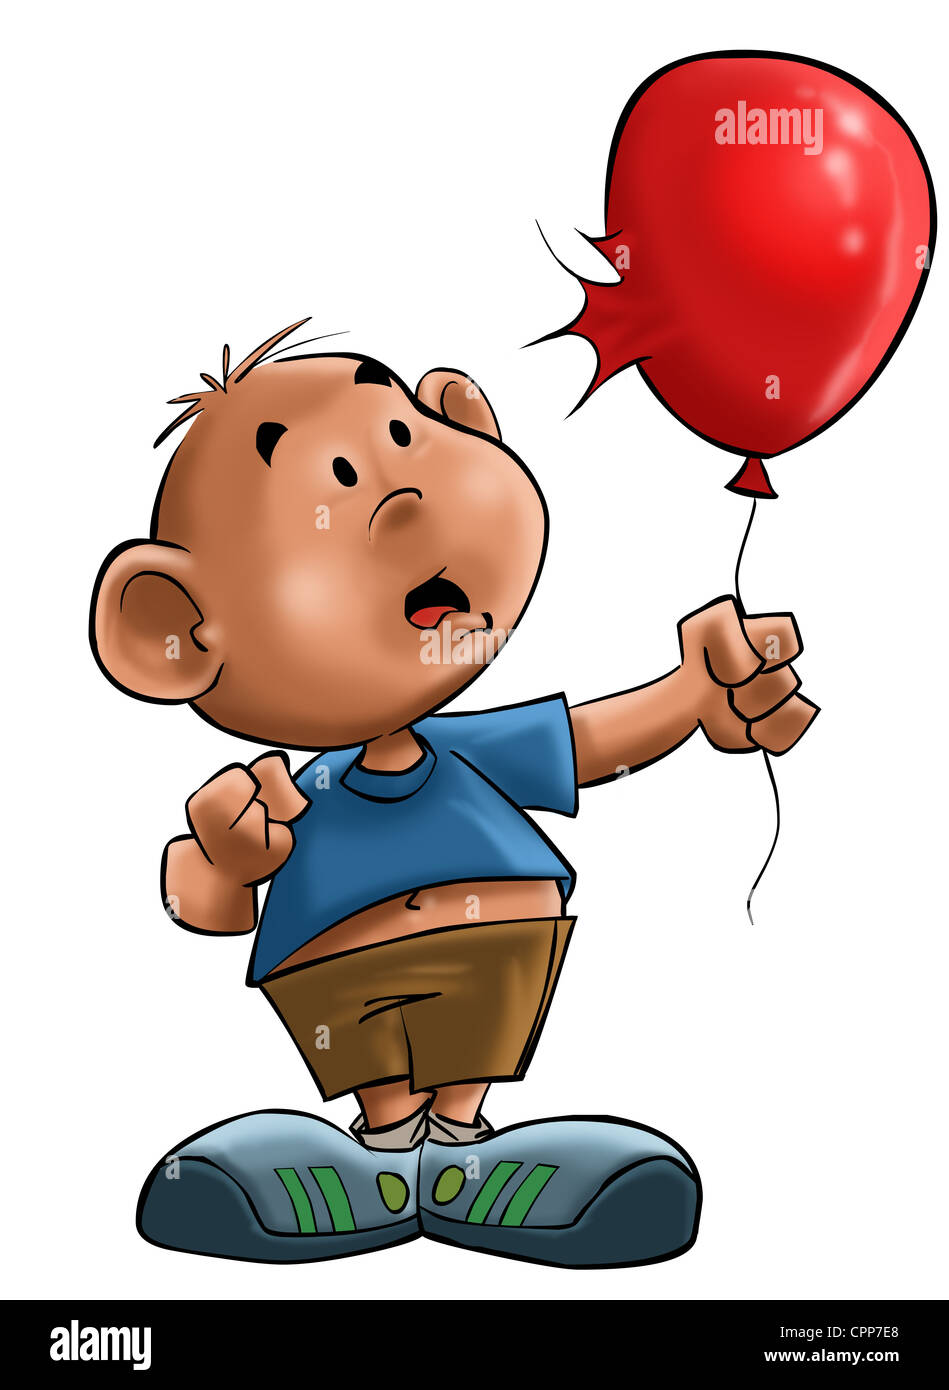 boy with a red balloon which get burst Stock Photo